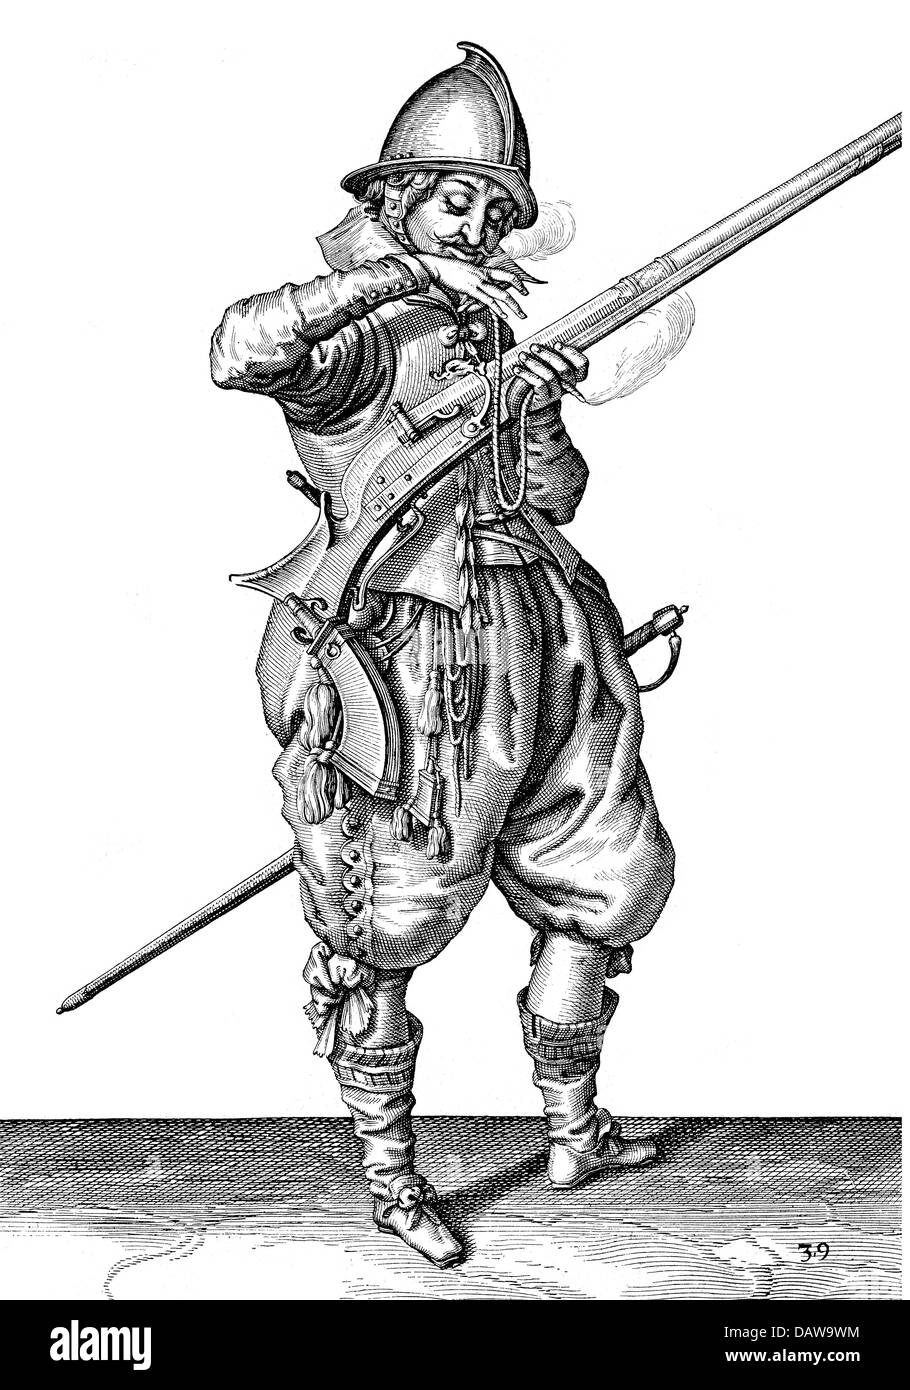 military, Netherlands, infantry, arquebusier from the army of Maurice of Nassau, Prince of Orange, circa 1608, Additional-Rights-Clearences-Not Available Stock Photo